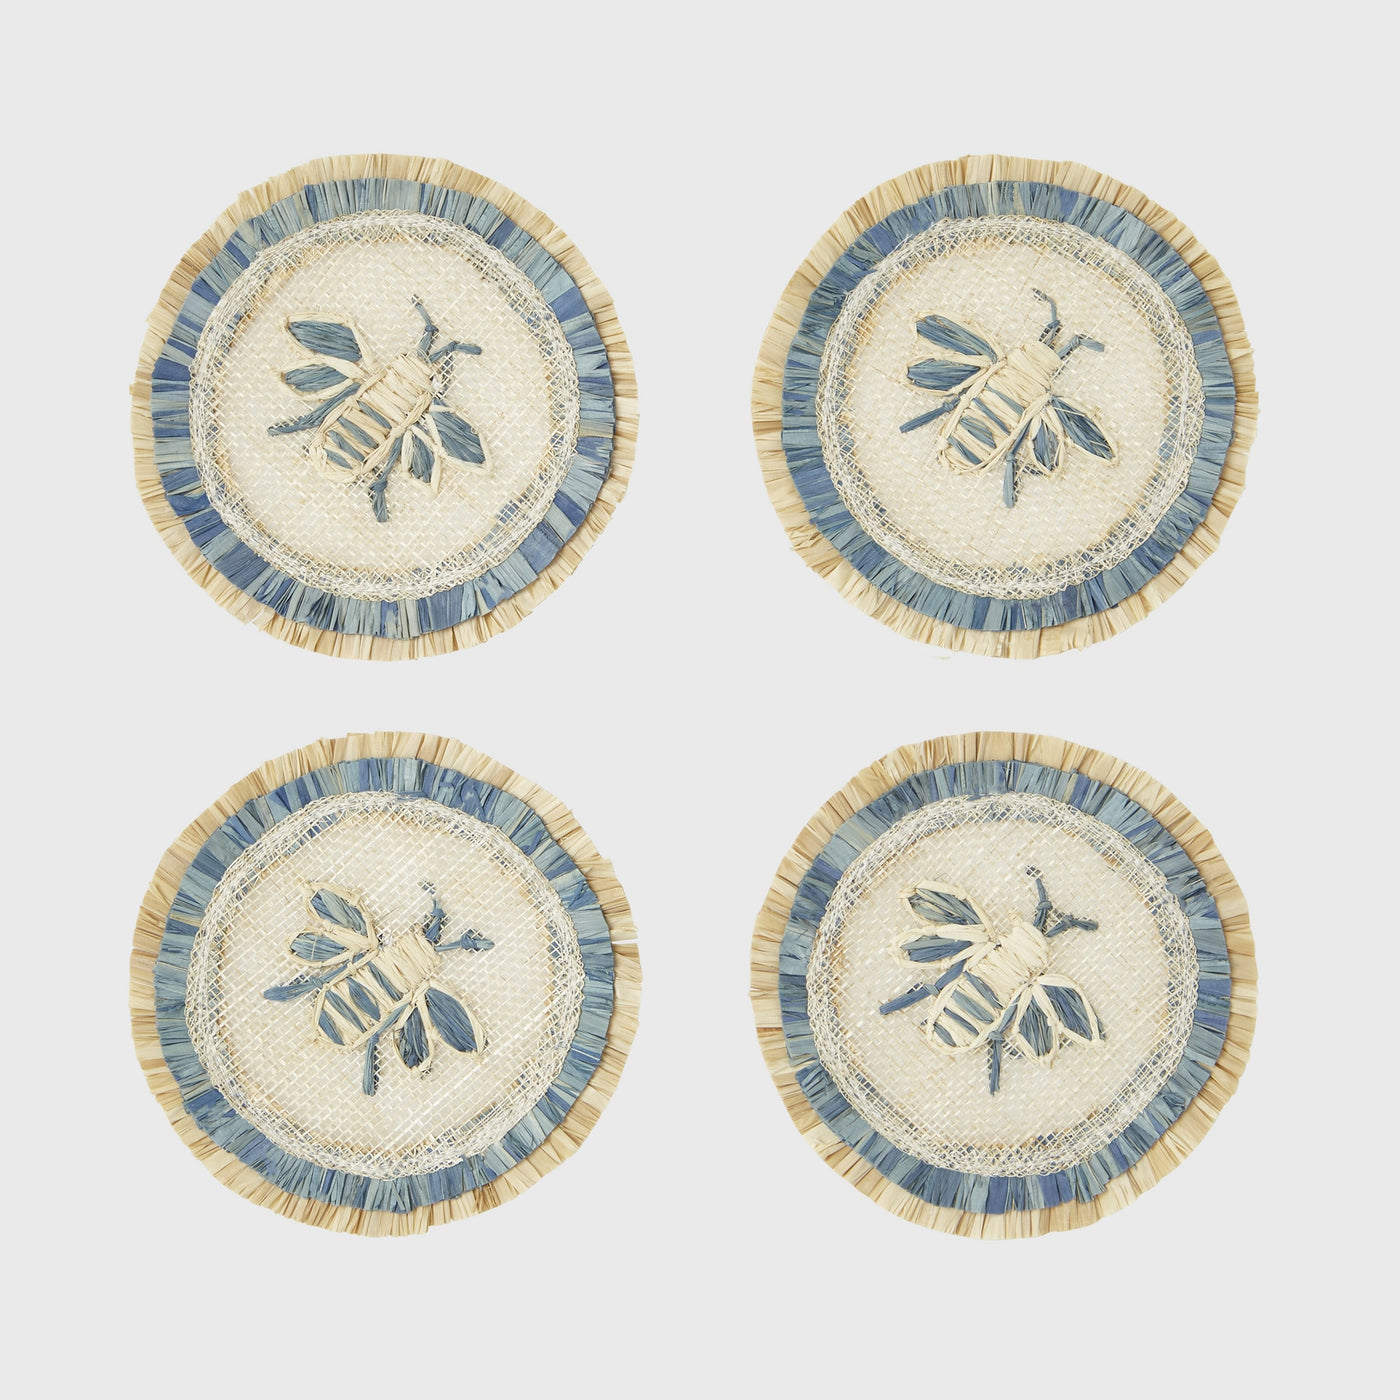 Embroidered Abaca Grass Coaster (S/4)